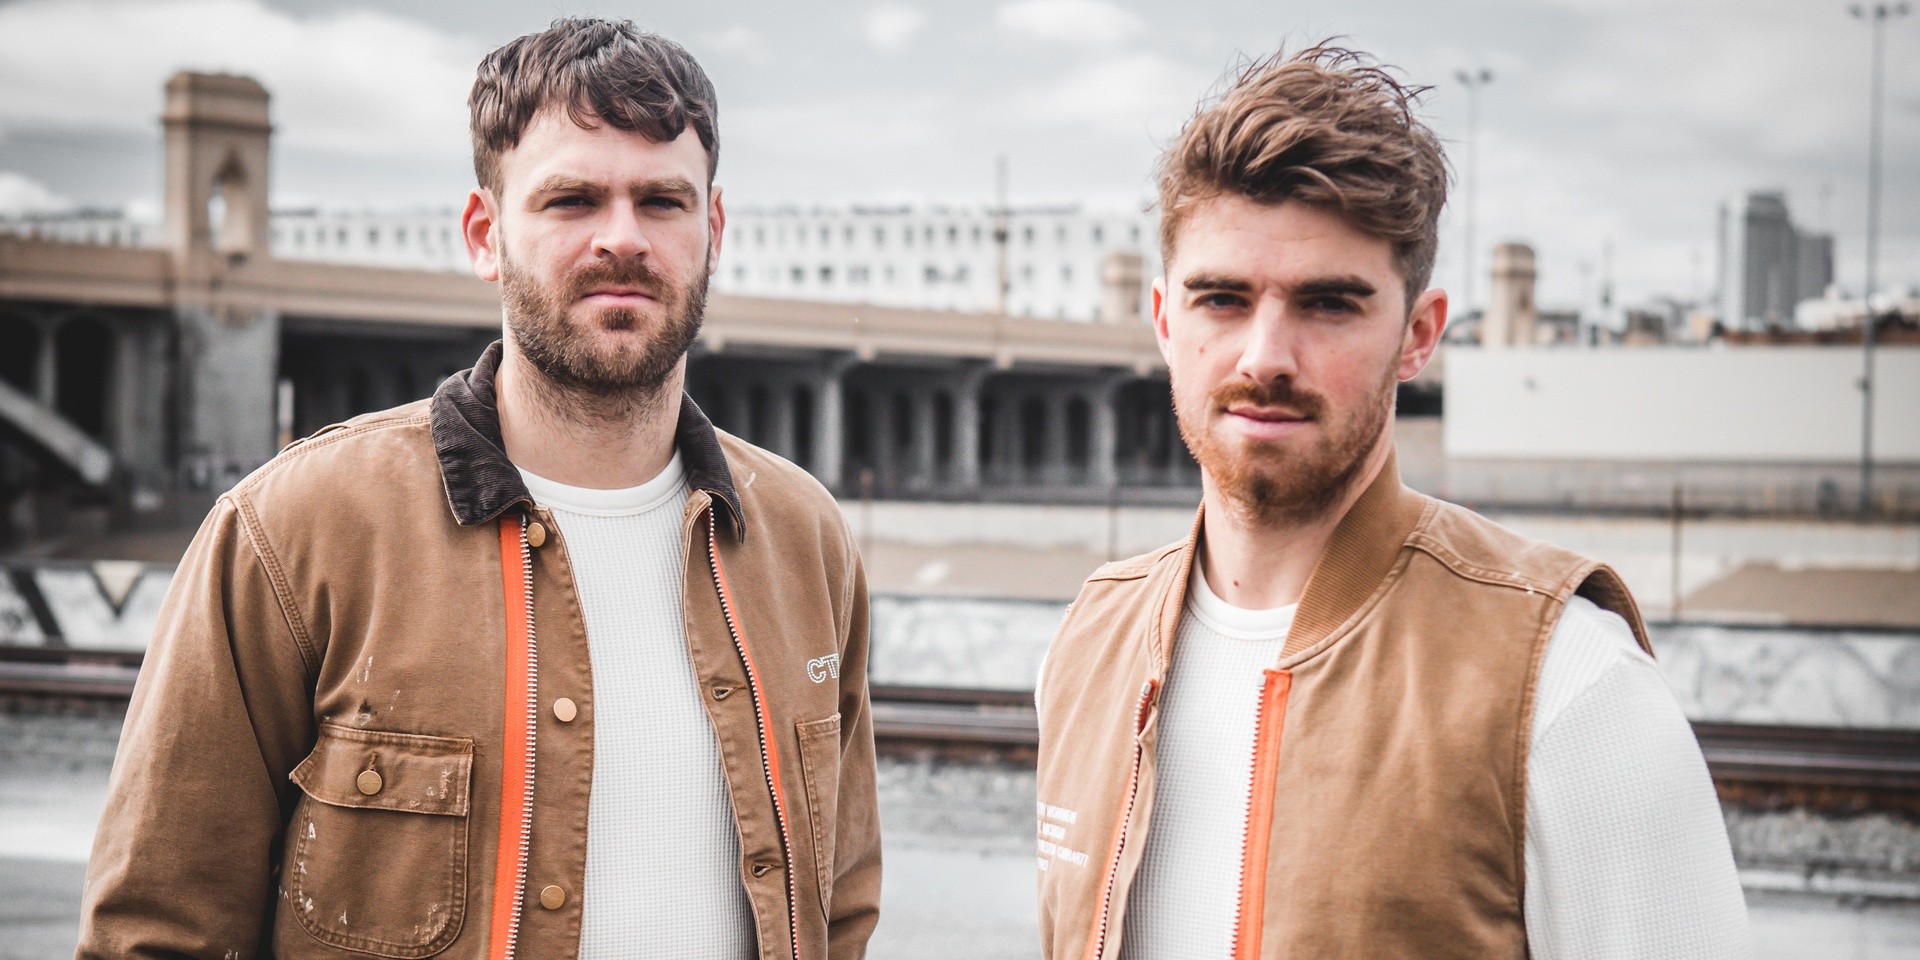 BREAKING: The Chainsmokers to perform in Singapore this August